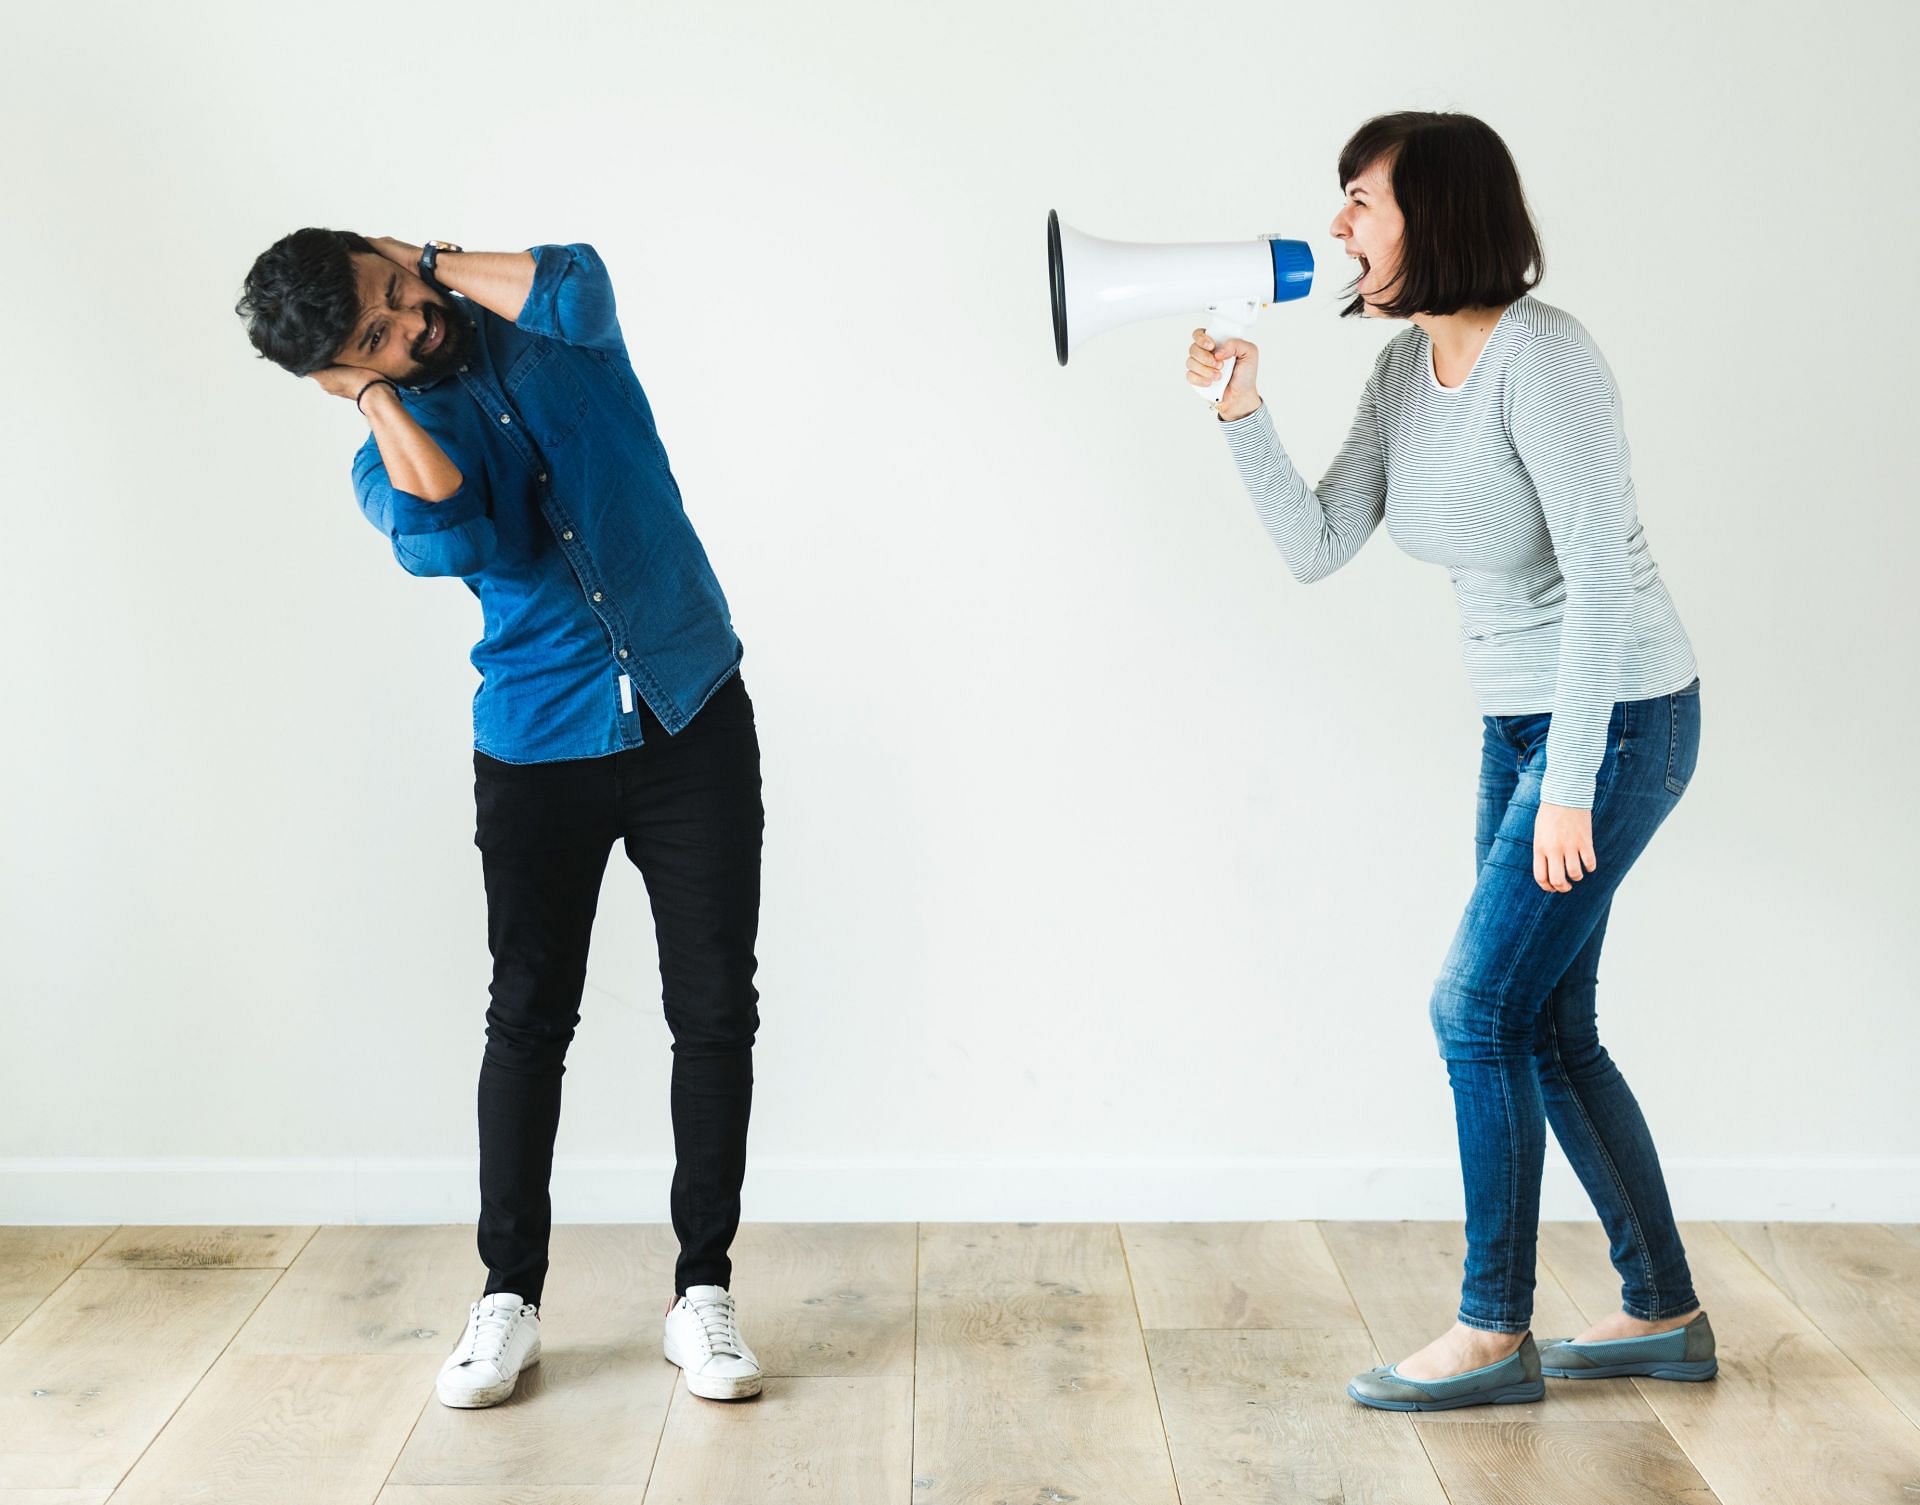 What causes adults and children to engage in this behavior? (Image via Freepik/rawpixel.com)